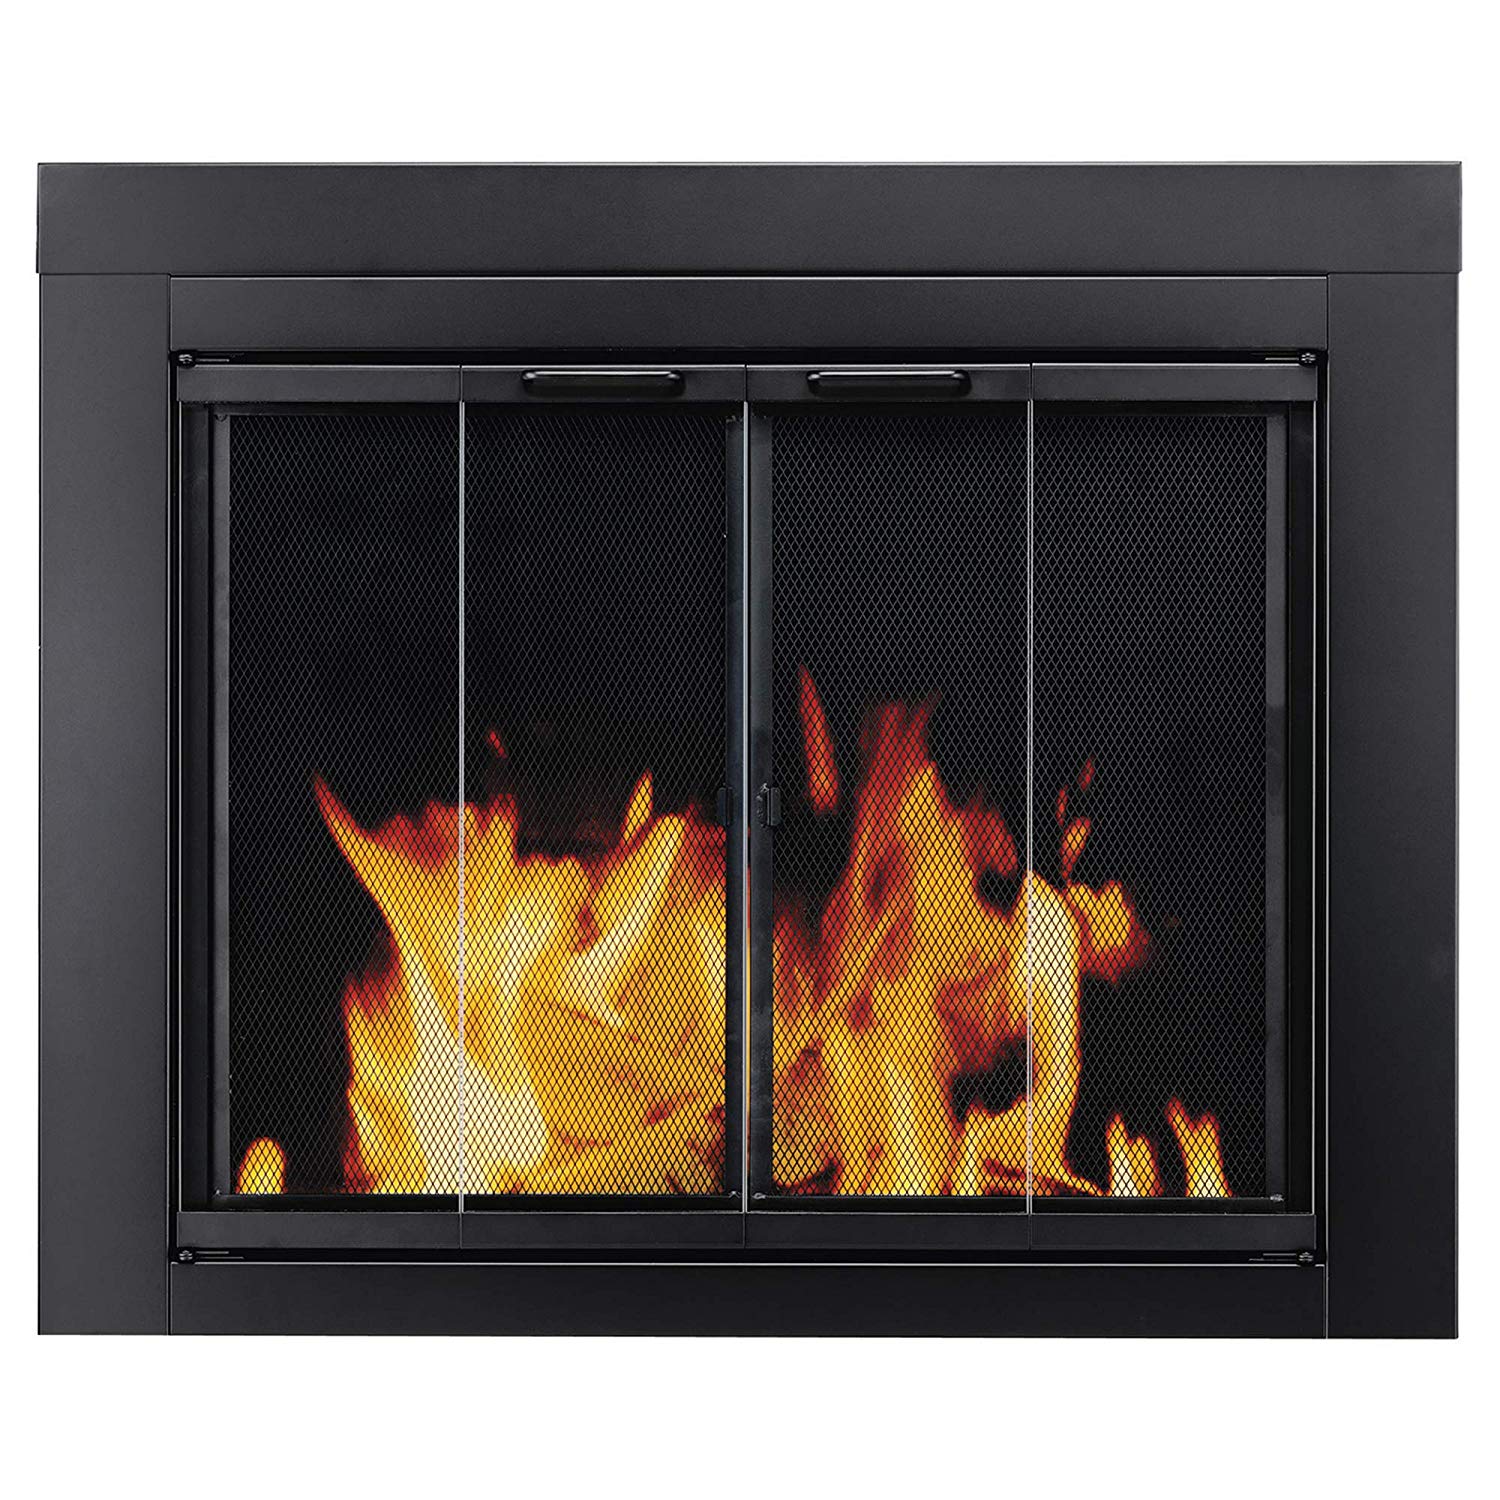 Fireplace Hearth Materials Beautiful Pleasant Hearth at 1000 ascot Fireplace Glass Door Black Small